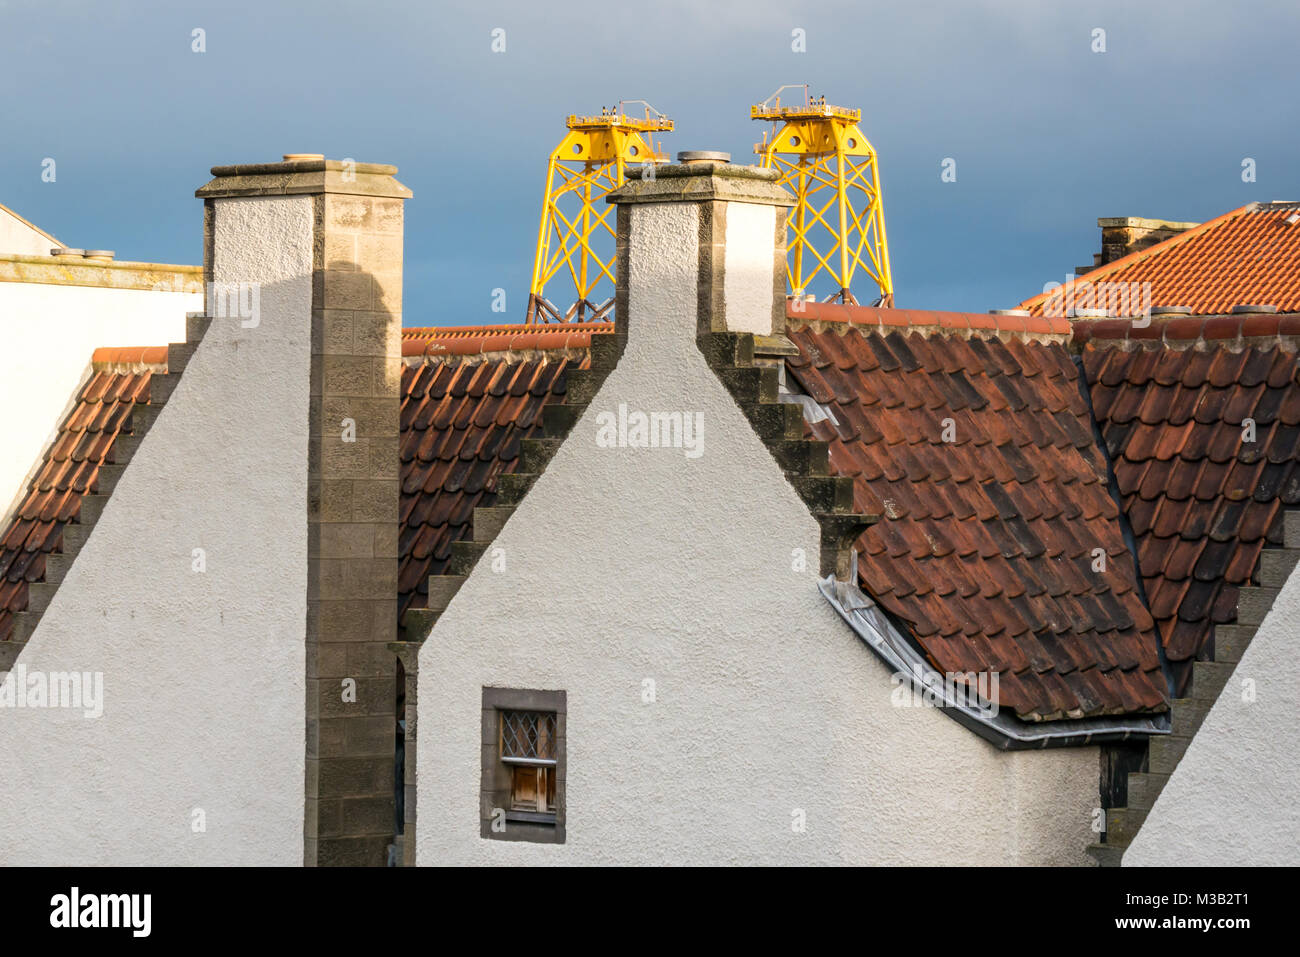 Leith, Edinburgh, Scotland, United Kingdom. Incongruous juxtaposition of huge yellow sunlit wind turbine platforms, called windfarm jackets, in Leith harbour towering over the pantile roof of one of the oldest buildings in Leith, 17th century Lamb's House, a former Hanseatic Leith Merchant house, now home to the architect who restored it, Nicholas Groves Raines. These platforms arrive in Leith on their way North to provide a sub structure for turbines in an offshore wind farm in the Moray Firth Stock Photo